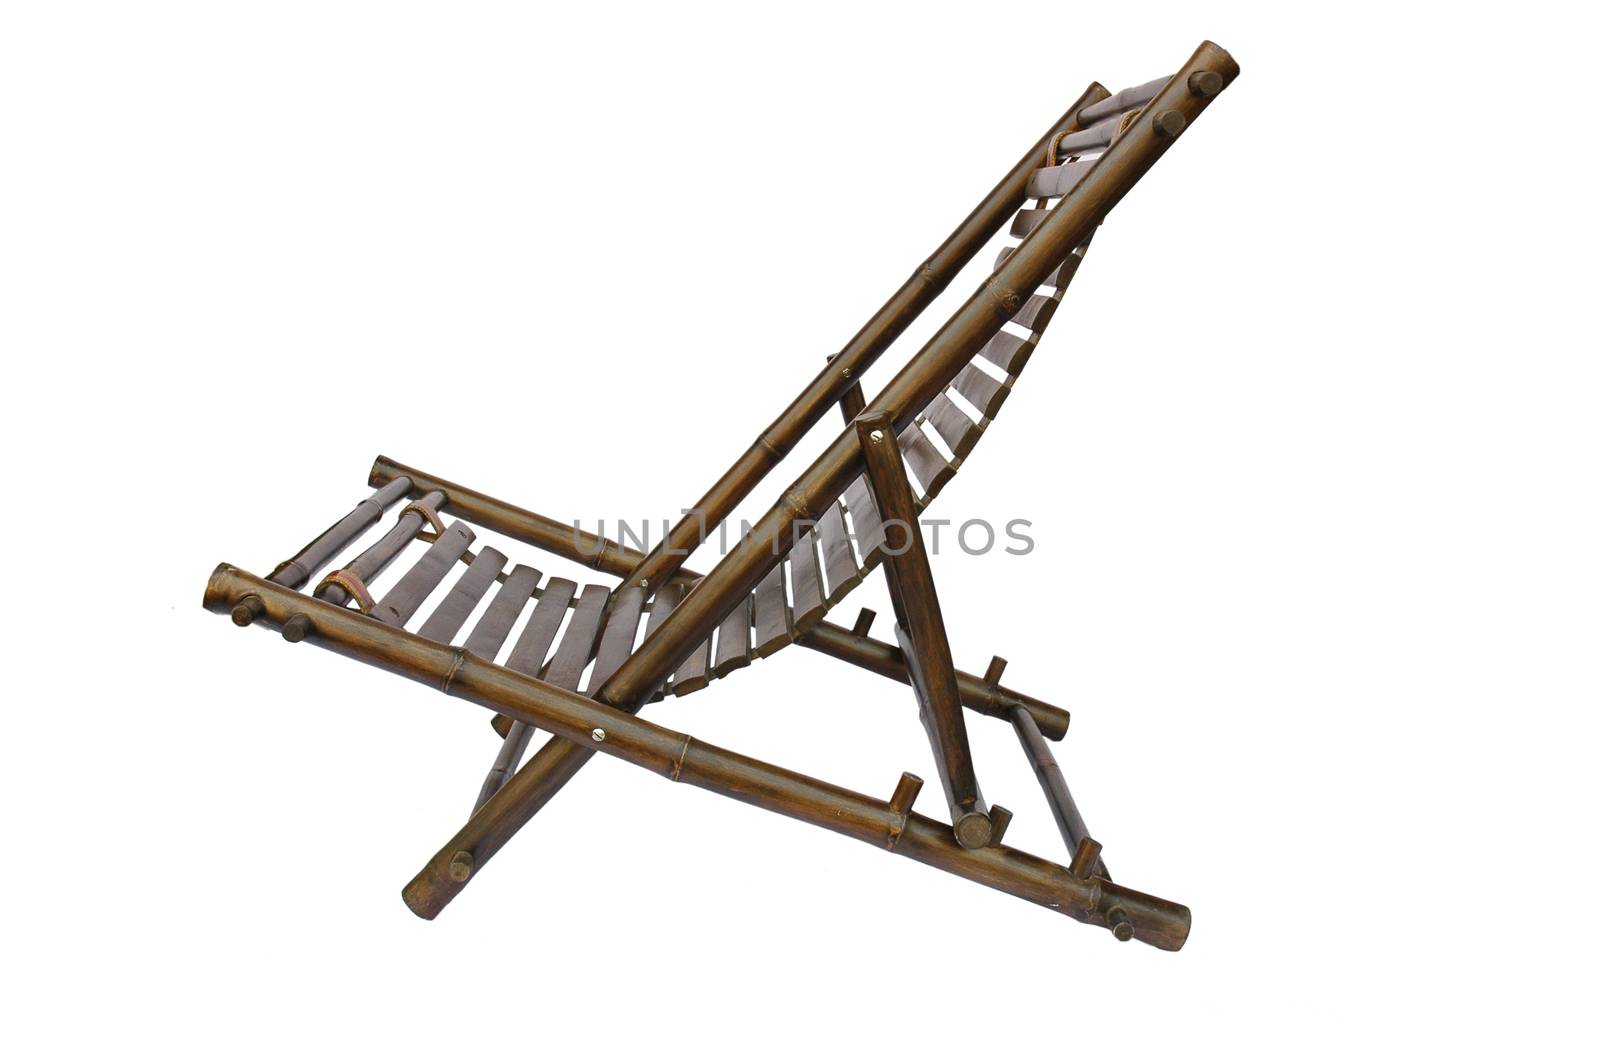 Bamboo lounge chair isolated on white background